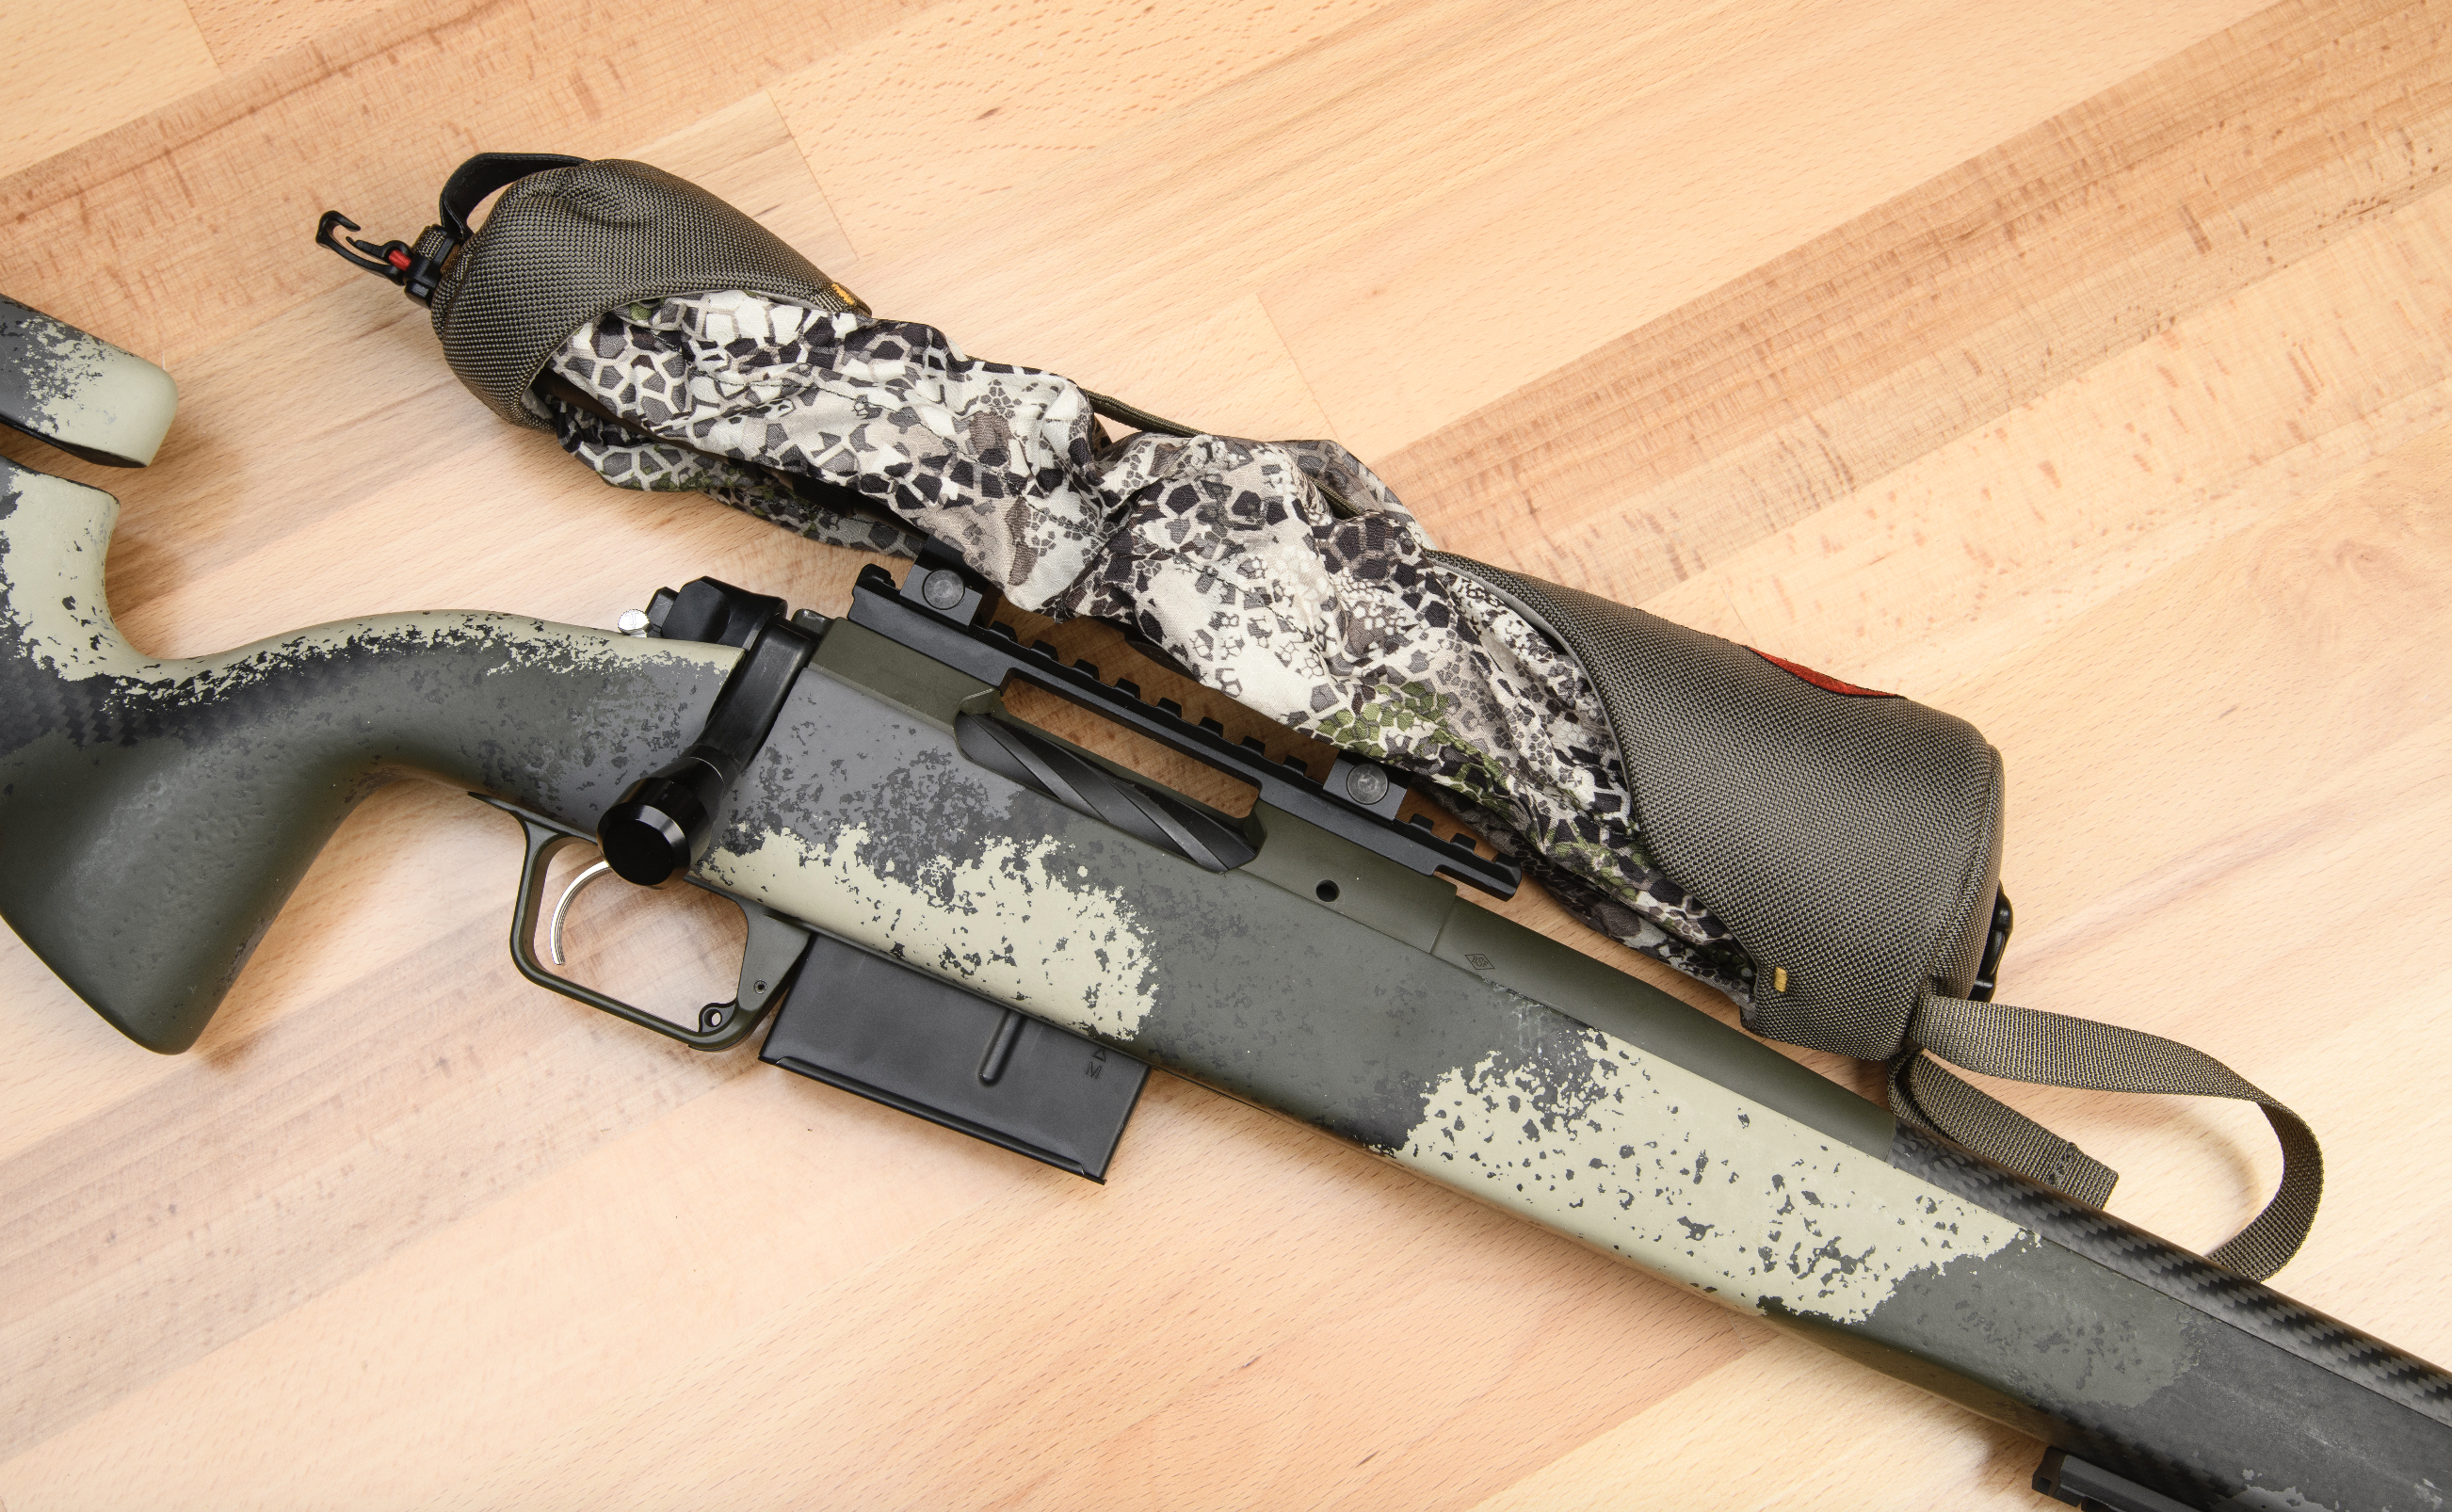 A scope cover in Badlands camo cinched over the scope on the Springfield Waypoint camo-stocked bolt-action hunting rifle.